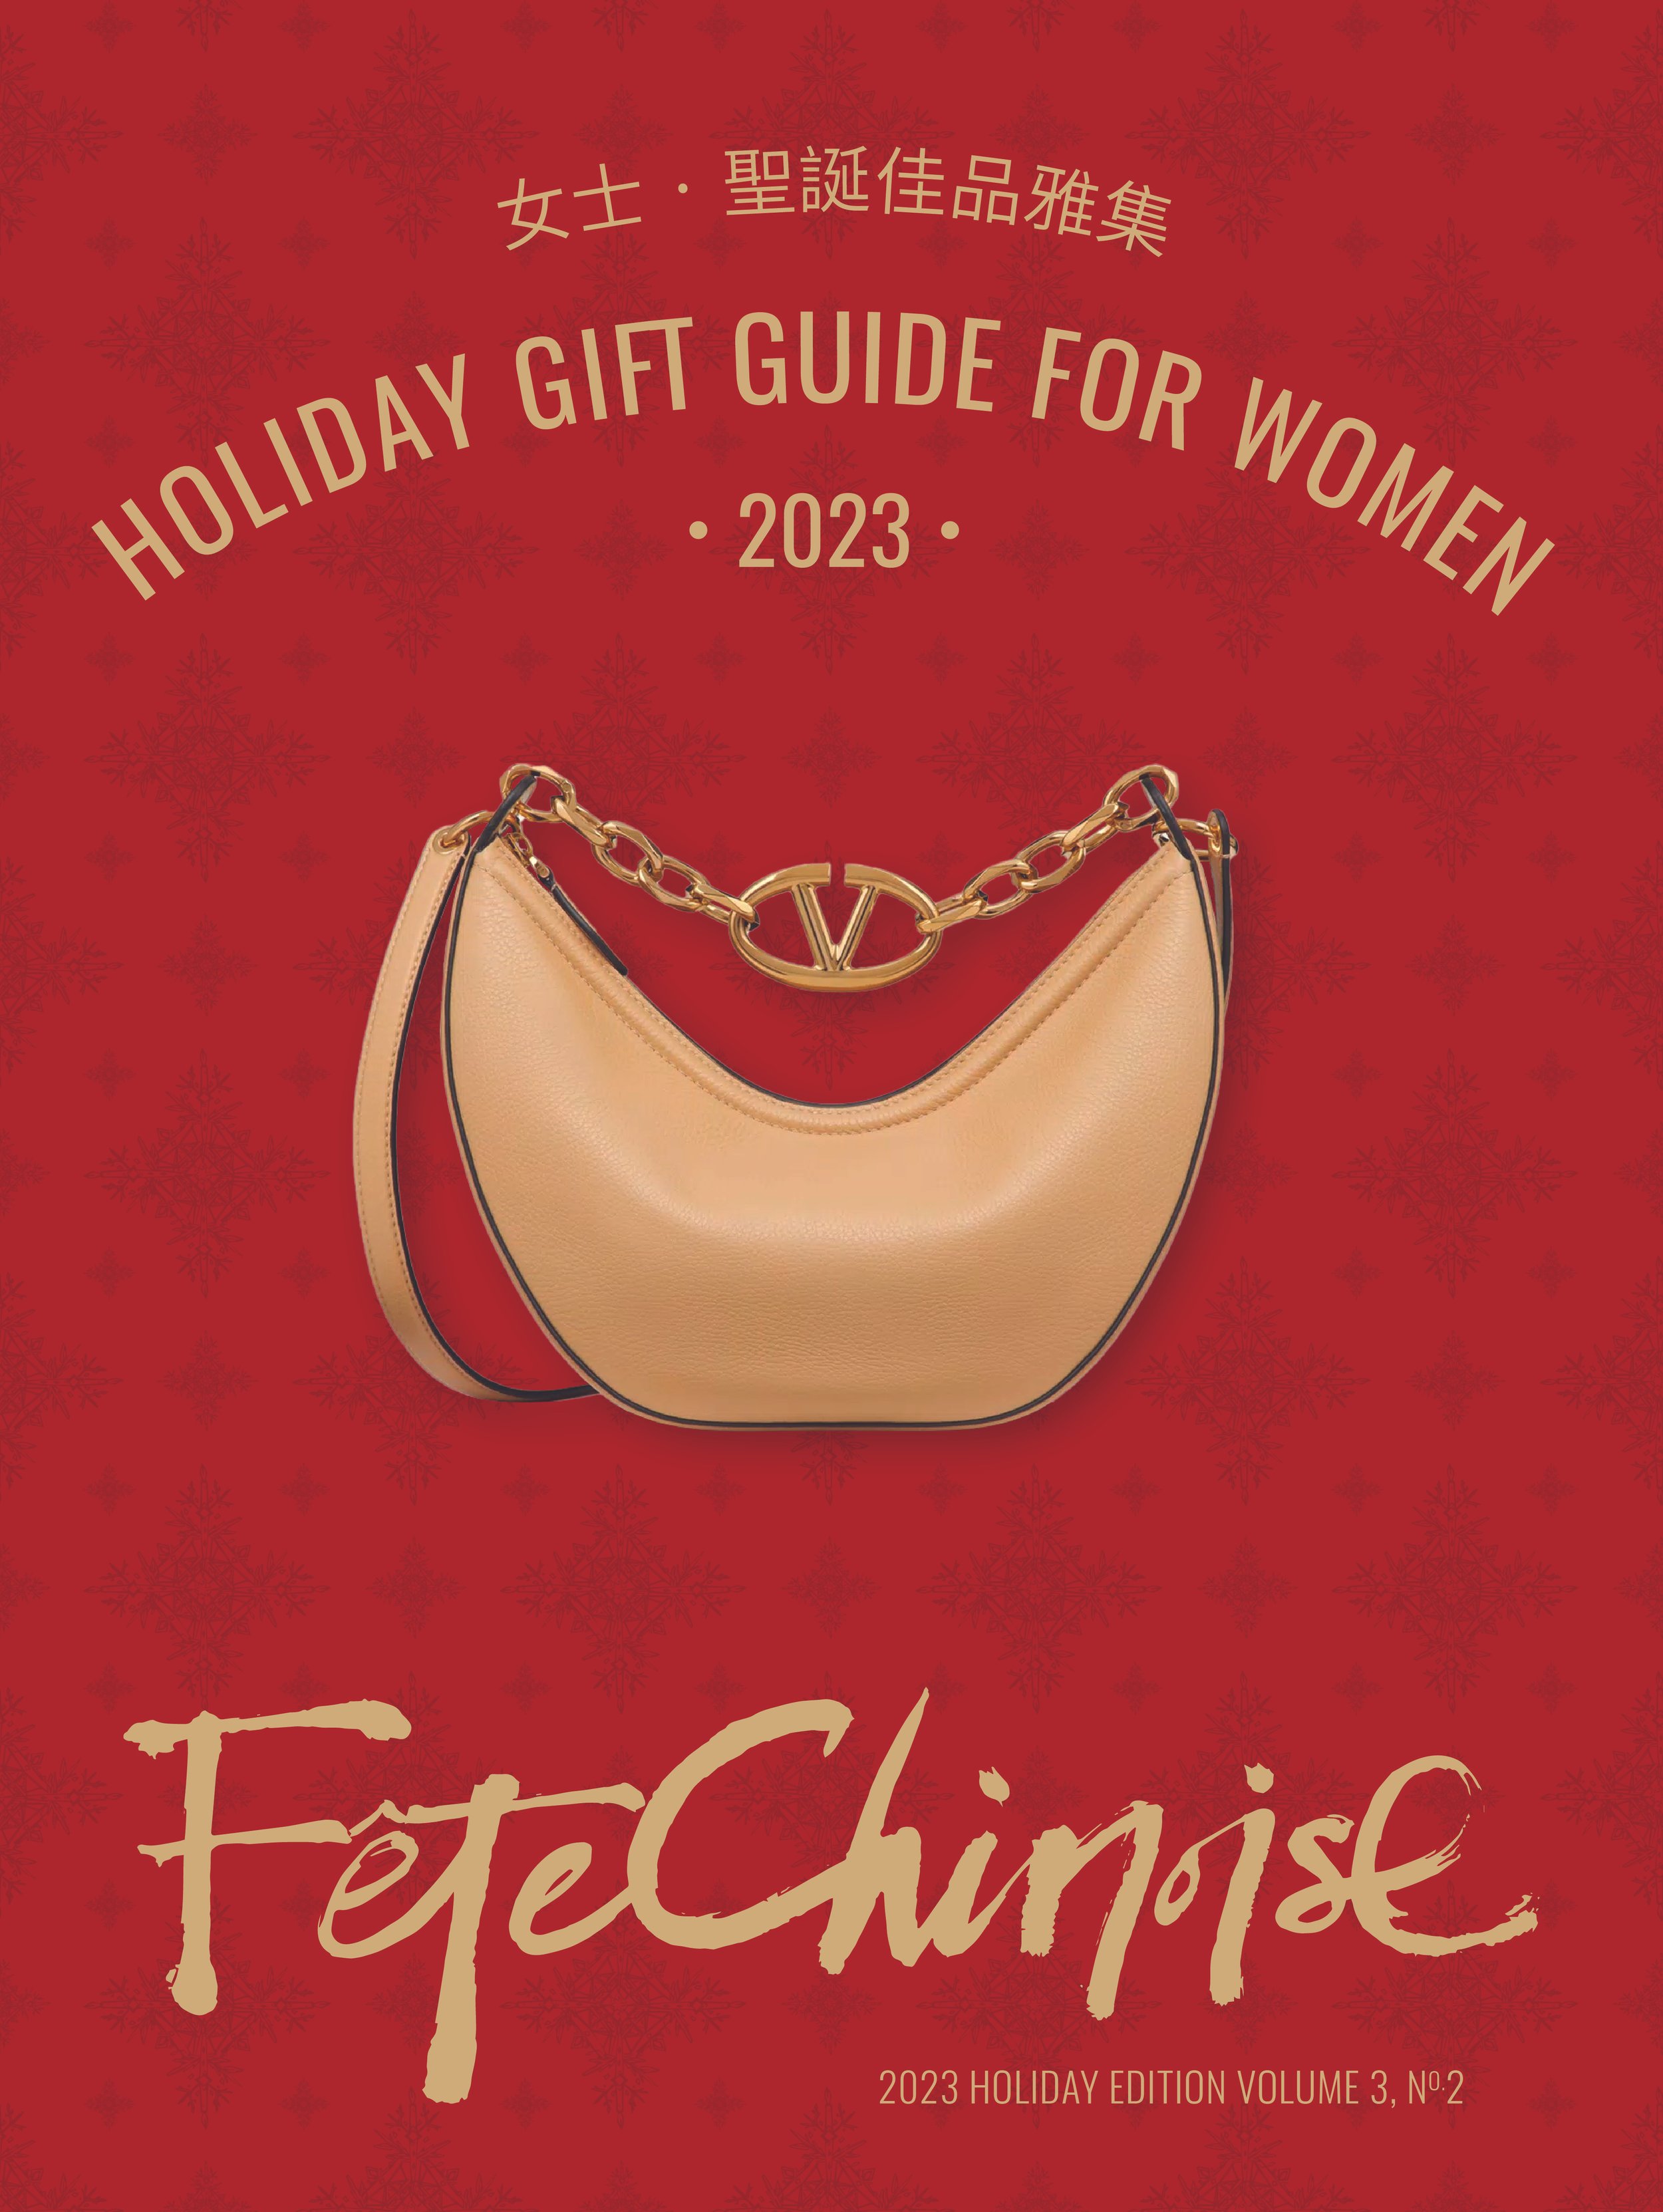 22 Christmas Gift Ideas for Coworkers in 2023